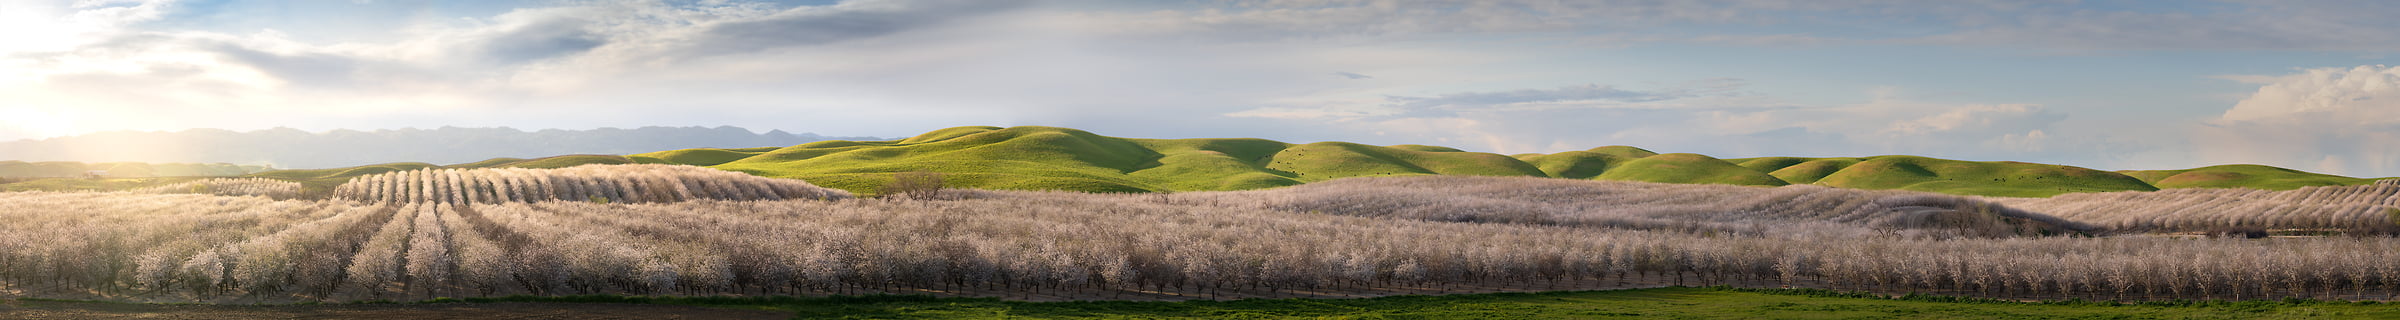 639 megapixels! A very high resolution, large-format VAST panorama photo of the Central Valley; landscape photograph created by Jeff Lewis in Central Valley, California.